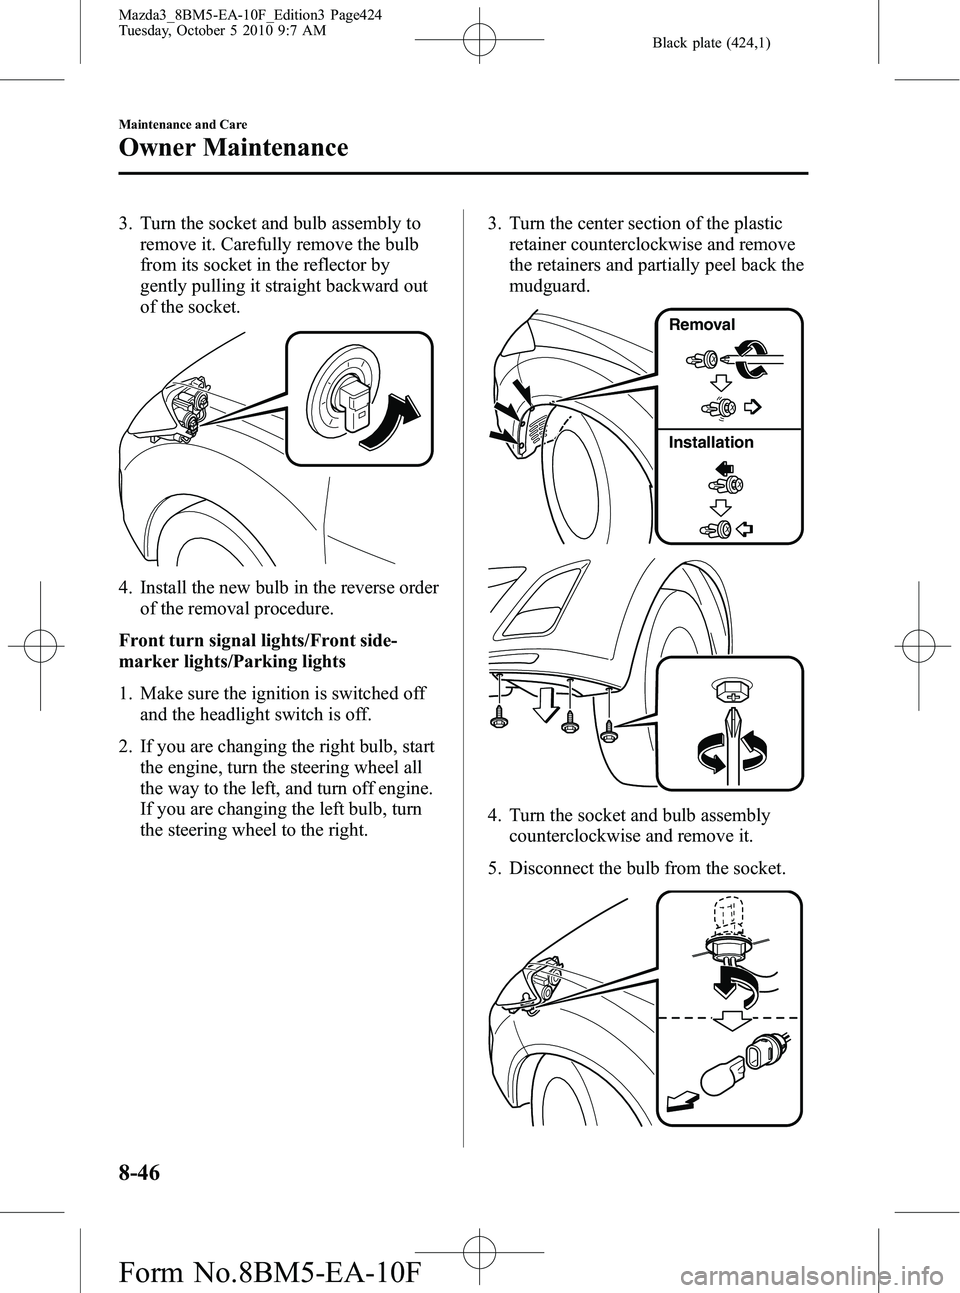 MAZDA MODEL 3 5-DOOR 2011  Owners Manual Black plate (424,1)
3. Turn the socket and bulb assembly toremove it. Carefully remove the bulb
from its socket in the reflector by
gently pulling it straight backward out
of the socket.
4. Install th